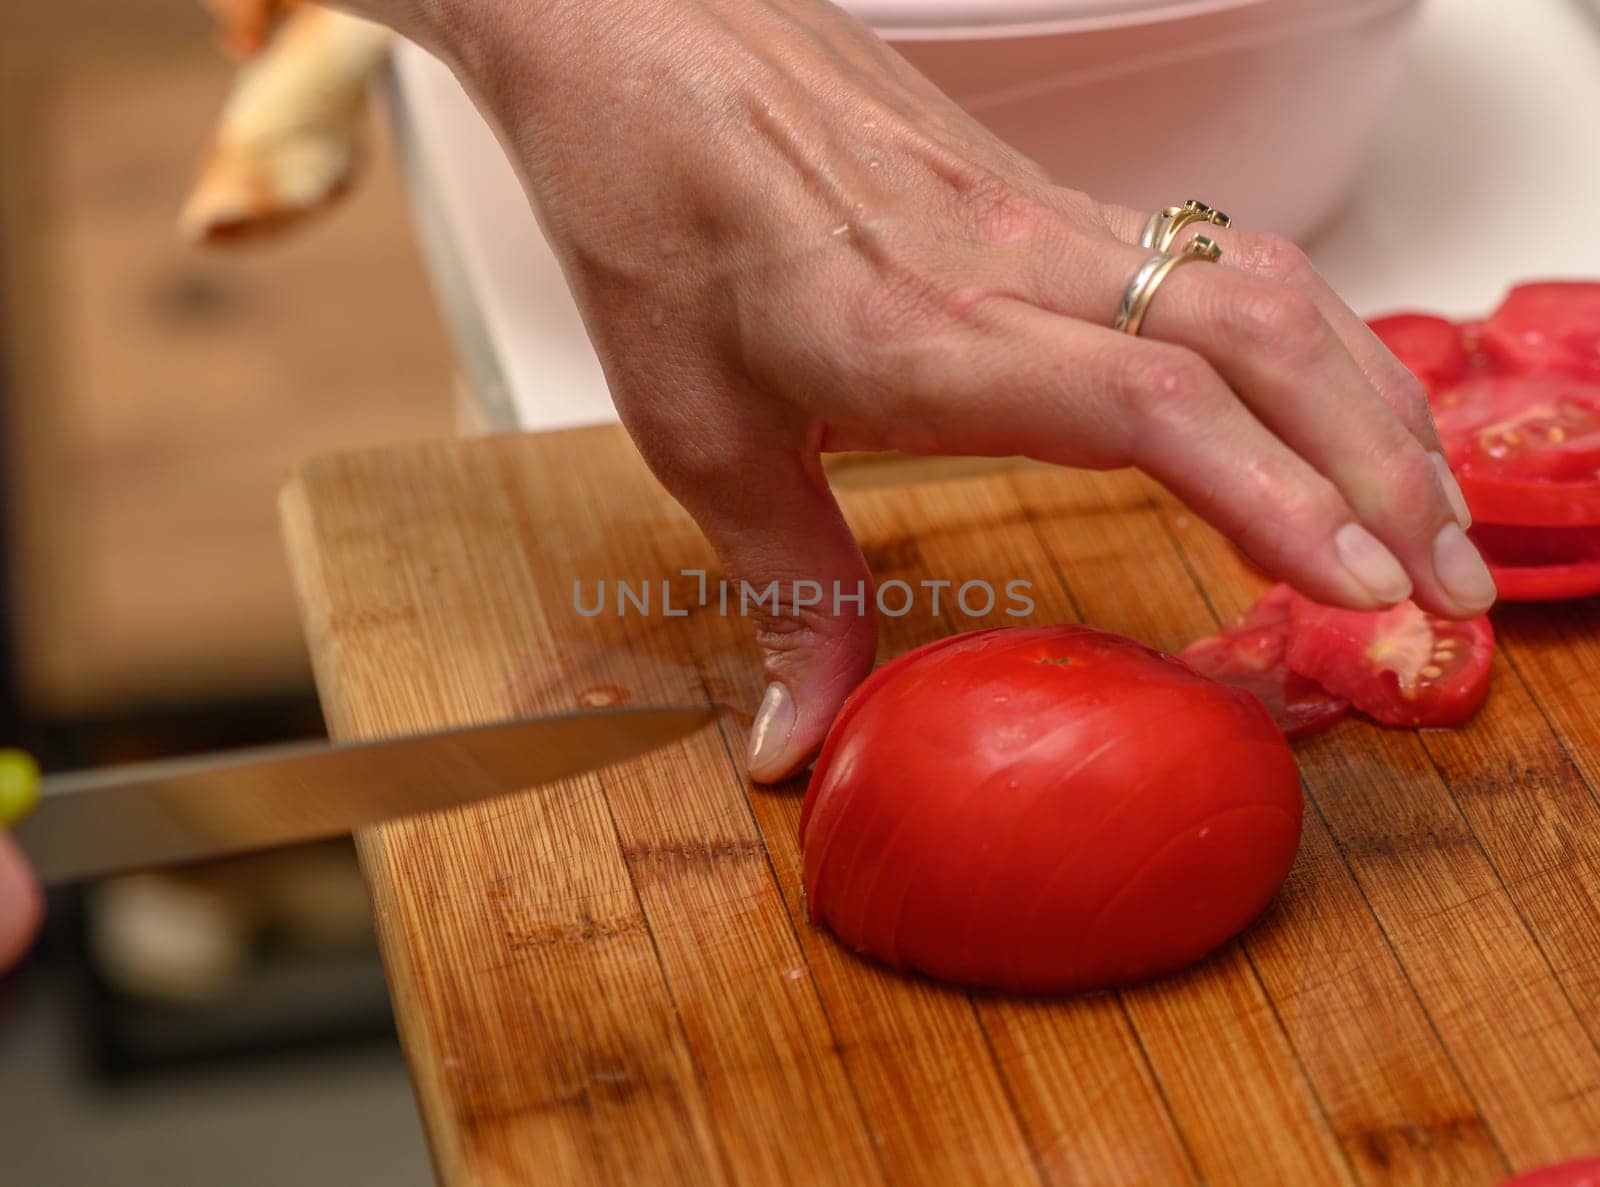 woman cutting tomato on kitchen board 6 by Mixa74